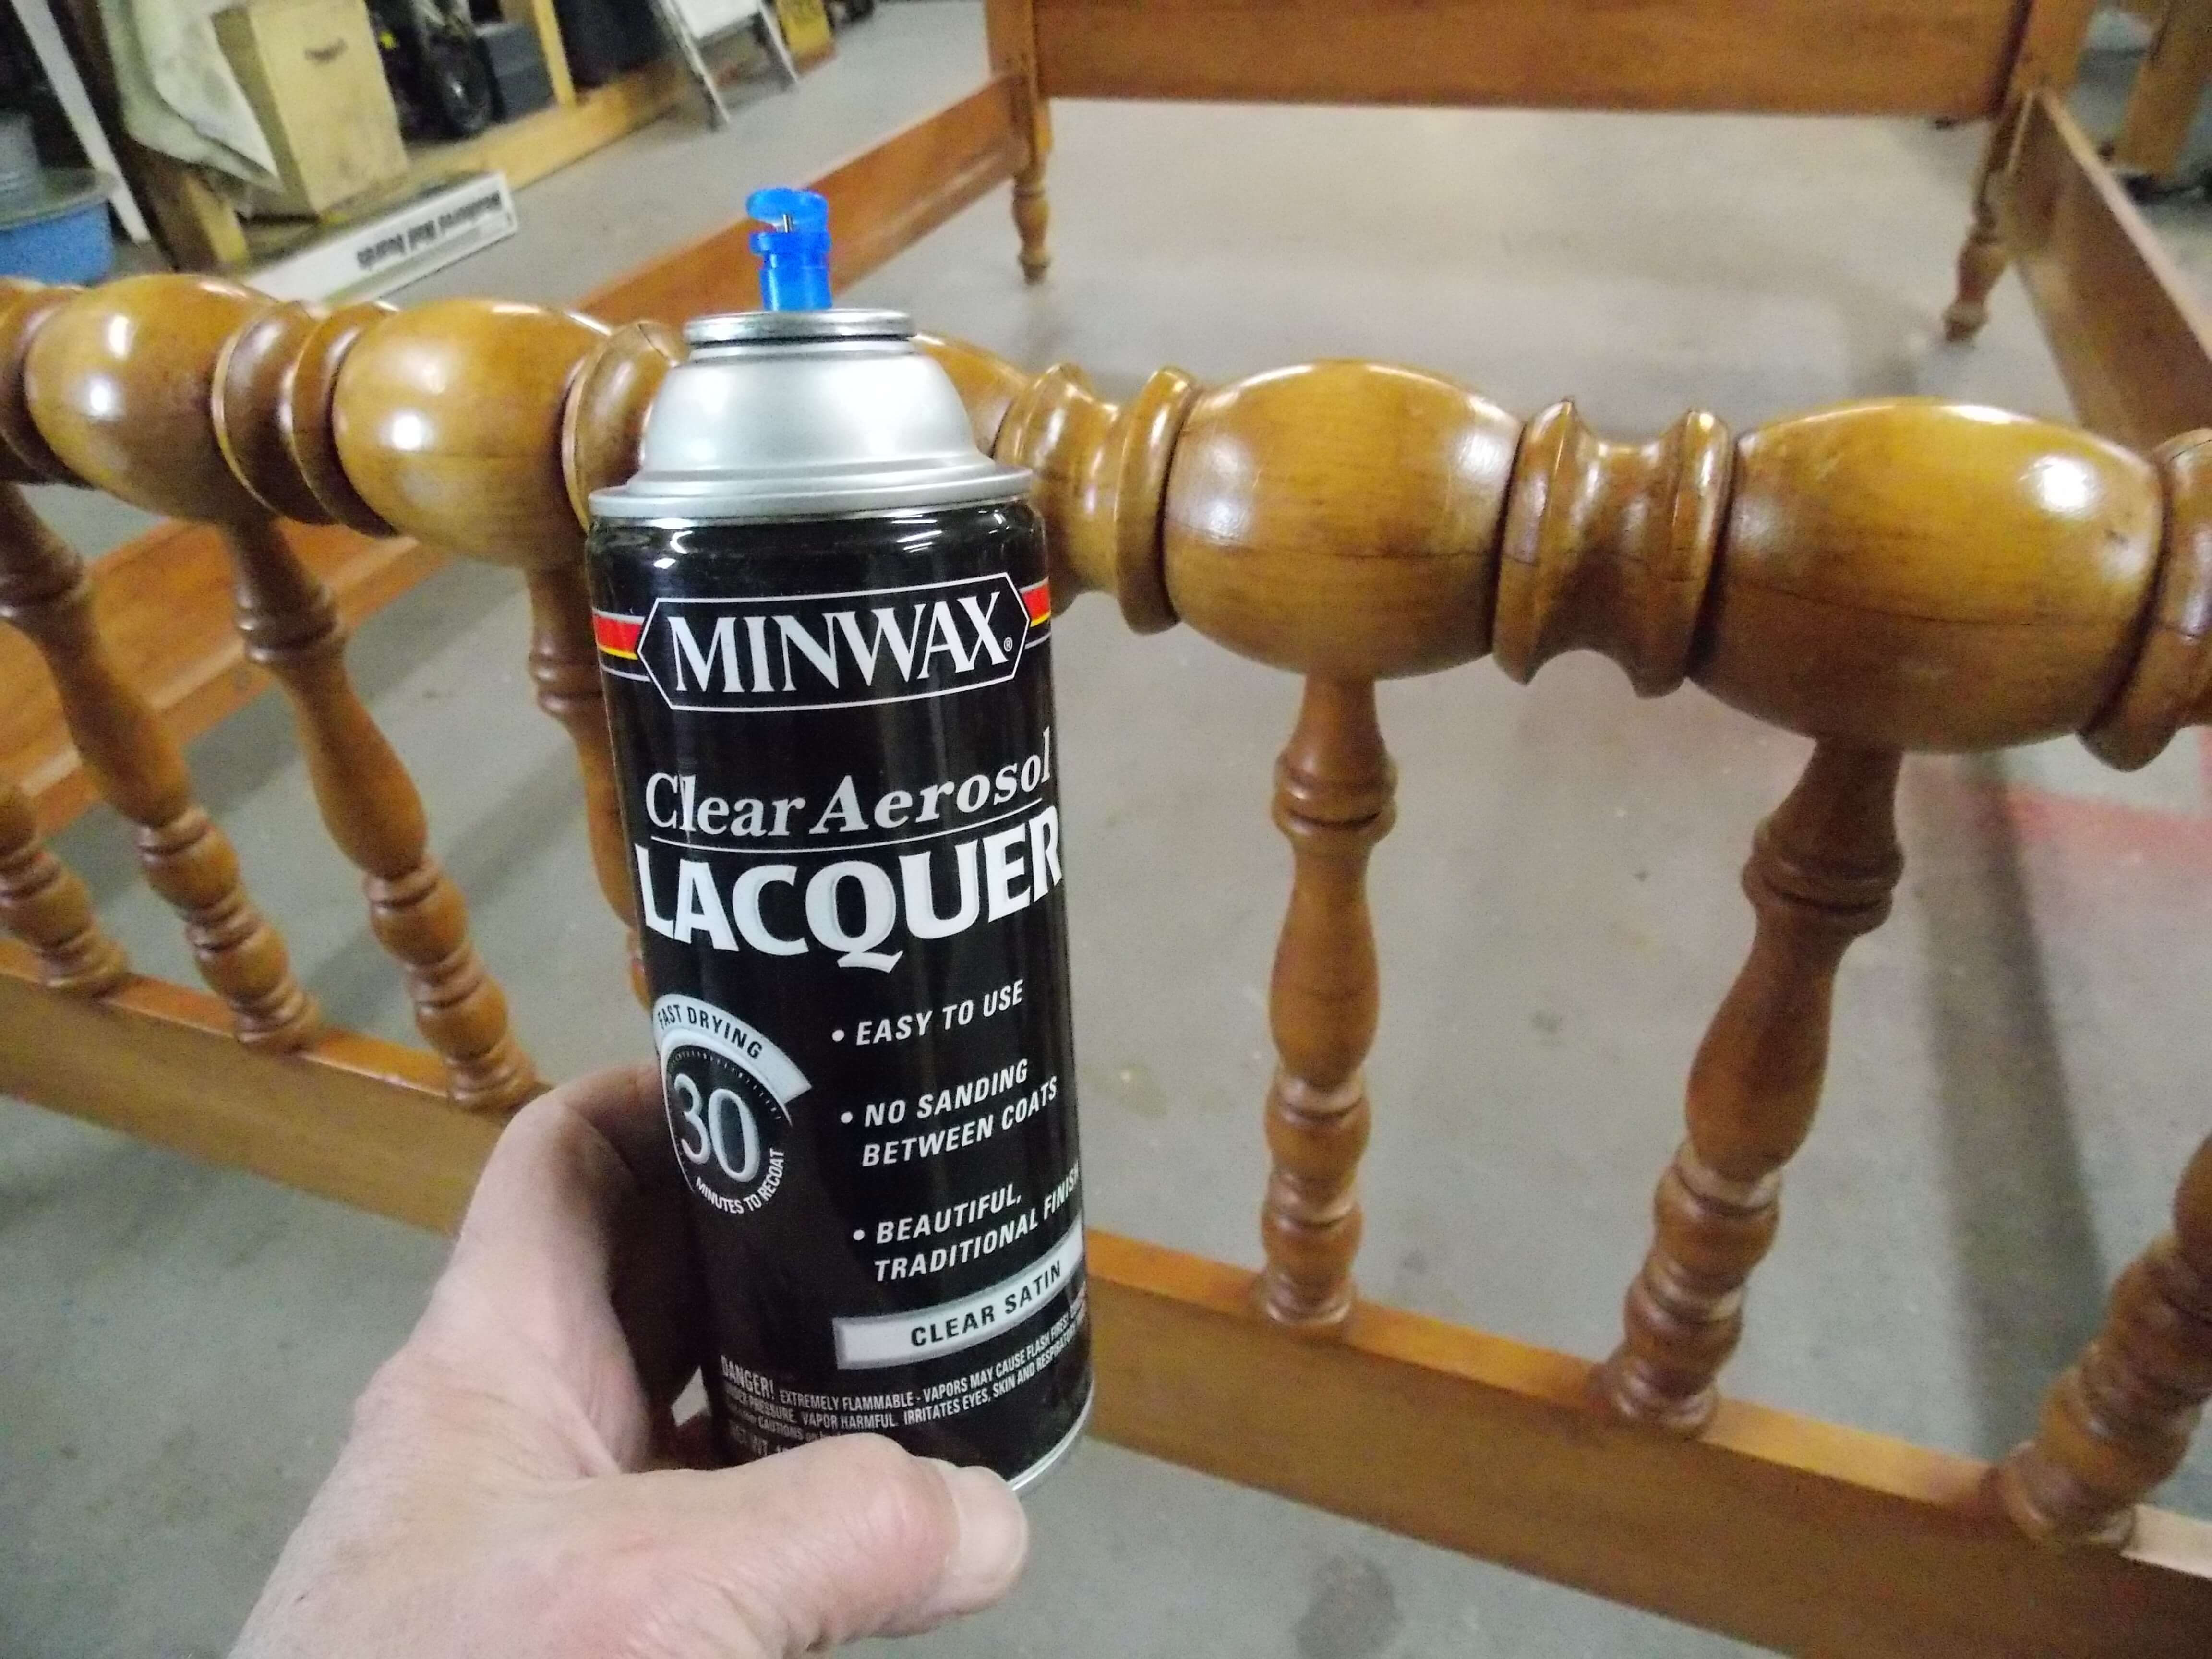 Using Minwax Clear Aerosol Lacquer for easy finish application